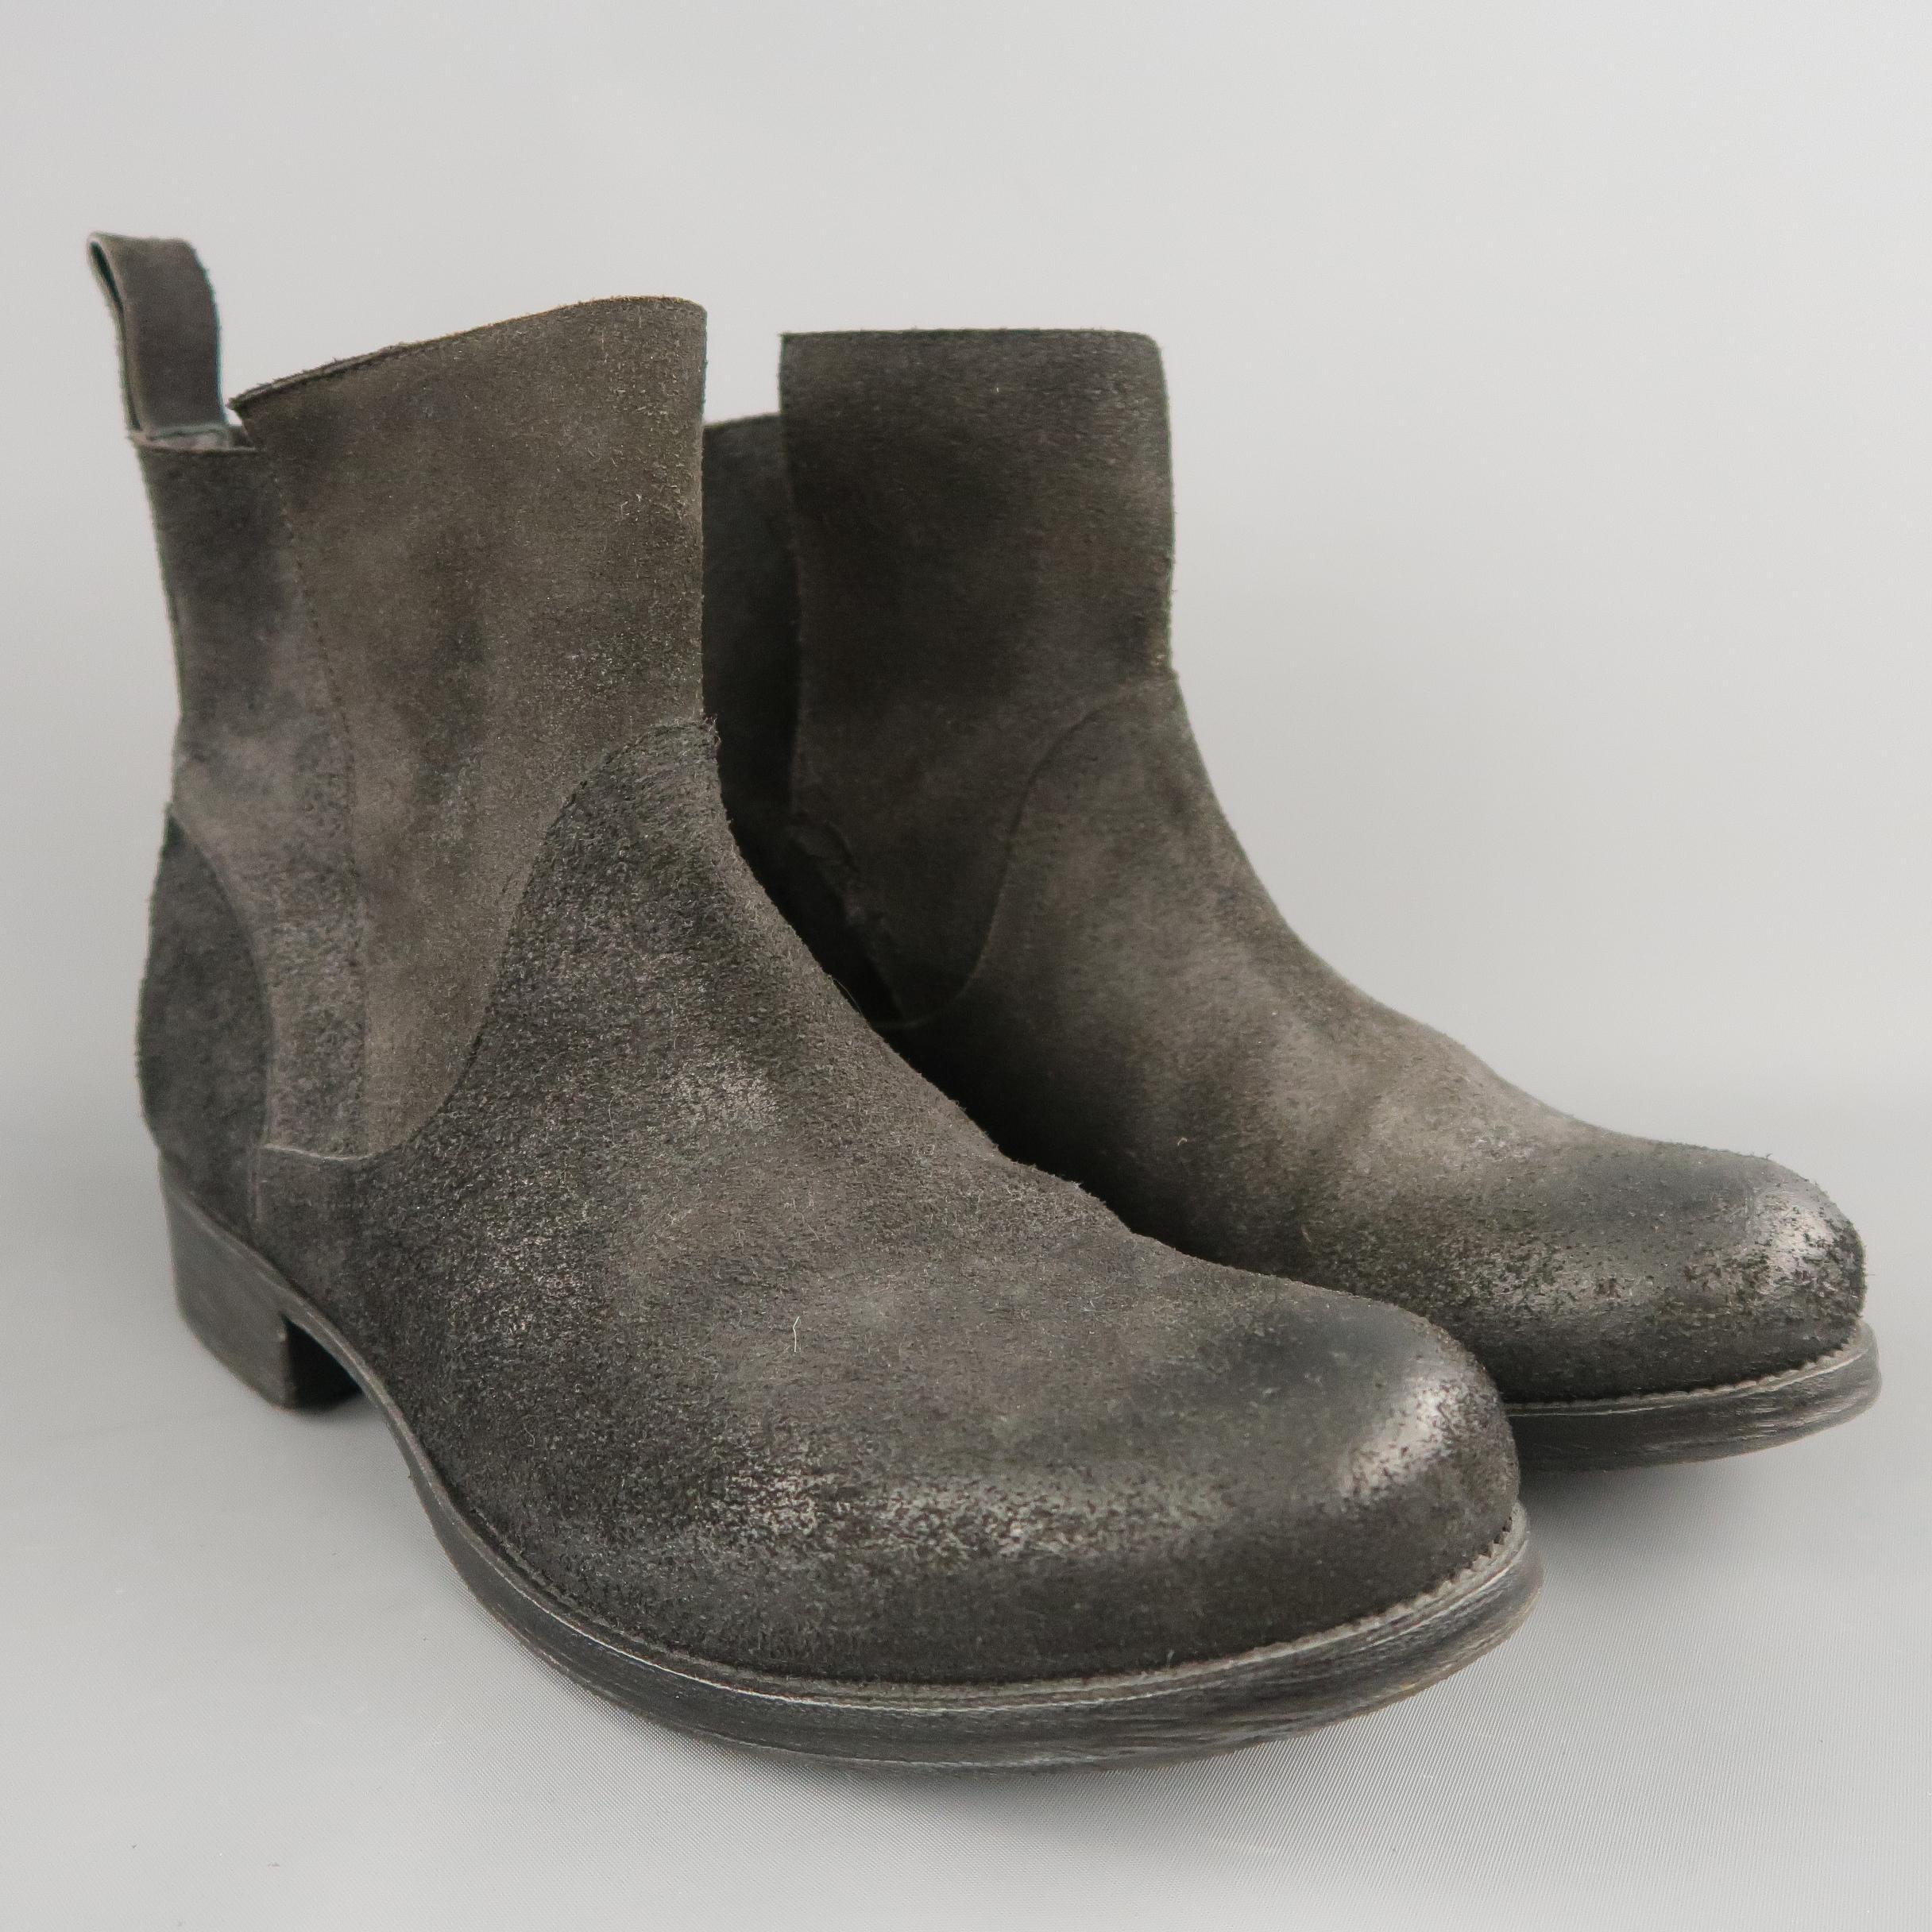 GIORGIO BRATO ankle boots come in black distressed textured suede with a rounded toe, textured, heeled, sole, and deconstructed overlap panel shaft. Stitching coming undone on left boot. as-is. Made in Italy.
 
Good Pre-Owned Condition.
Marked: IT